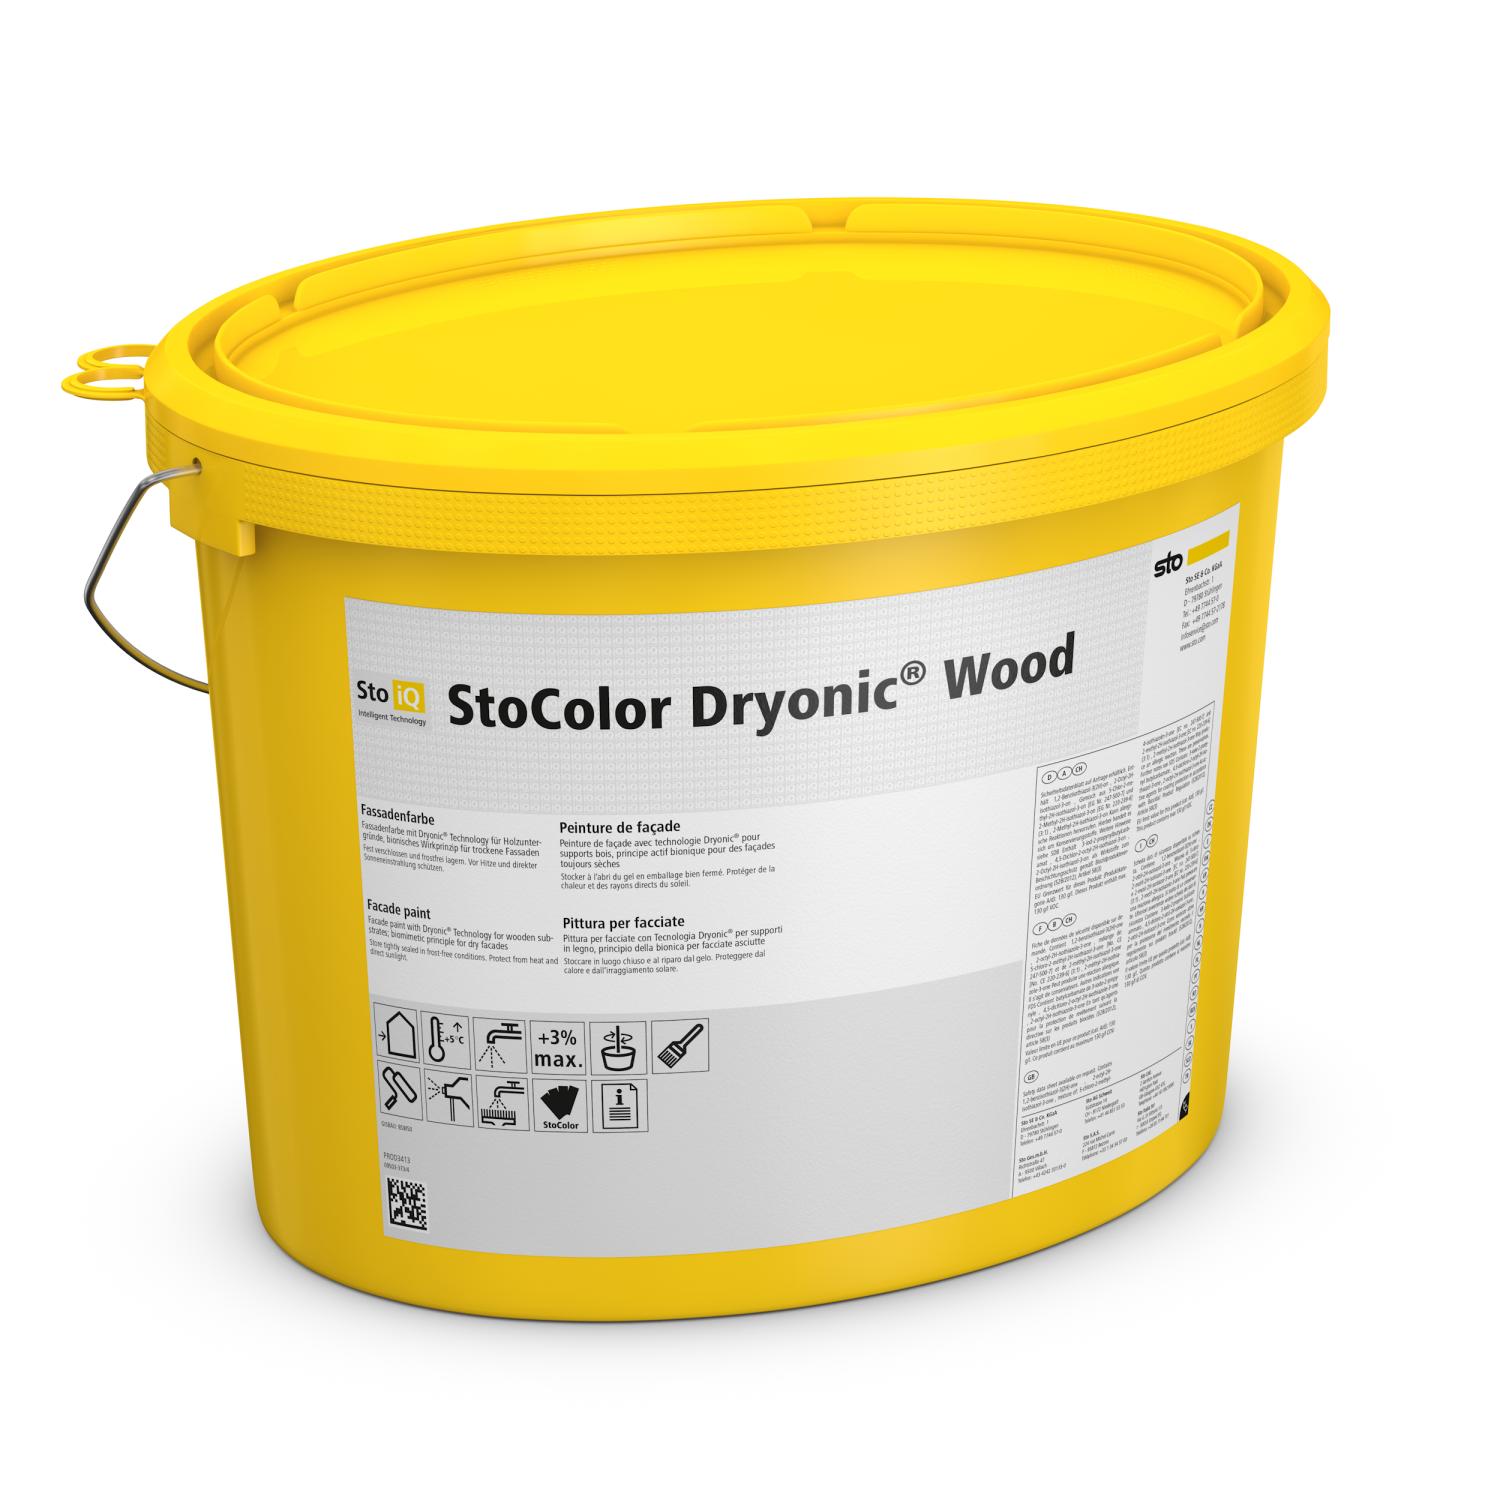 StoColor Dryonic Wood weiß - 10 l Eimer